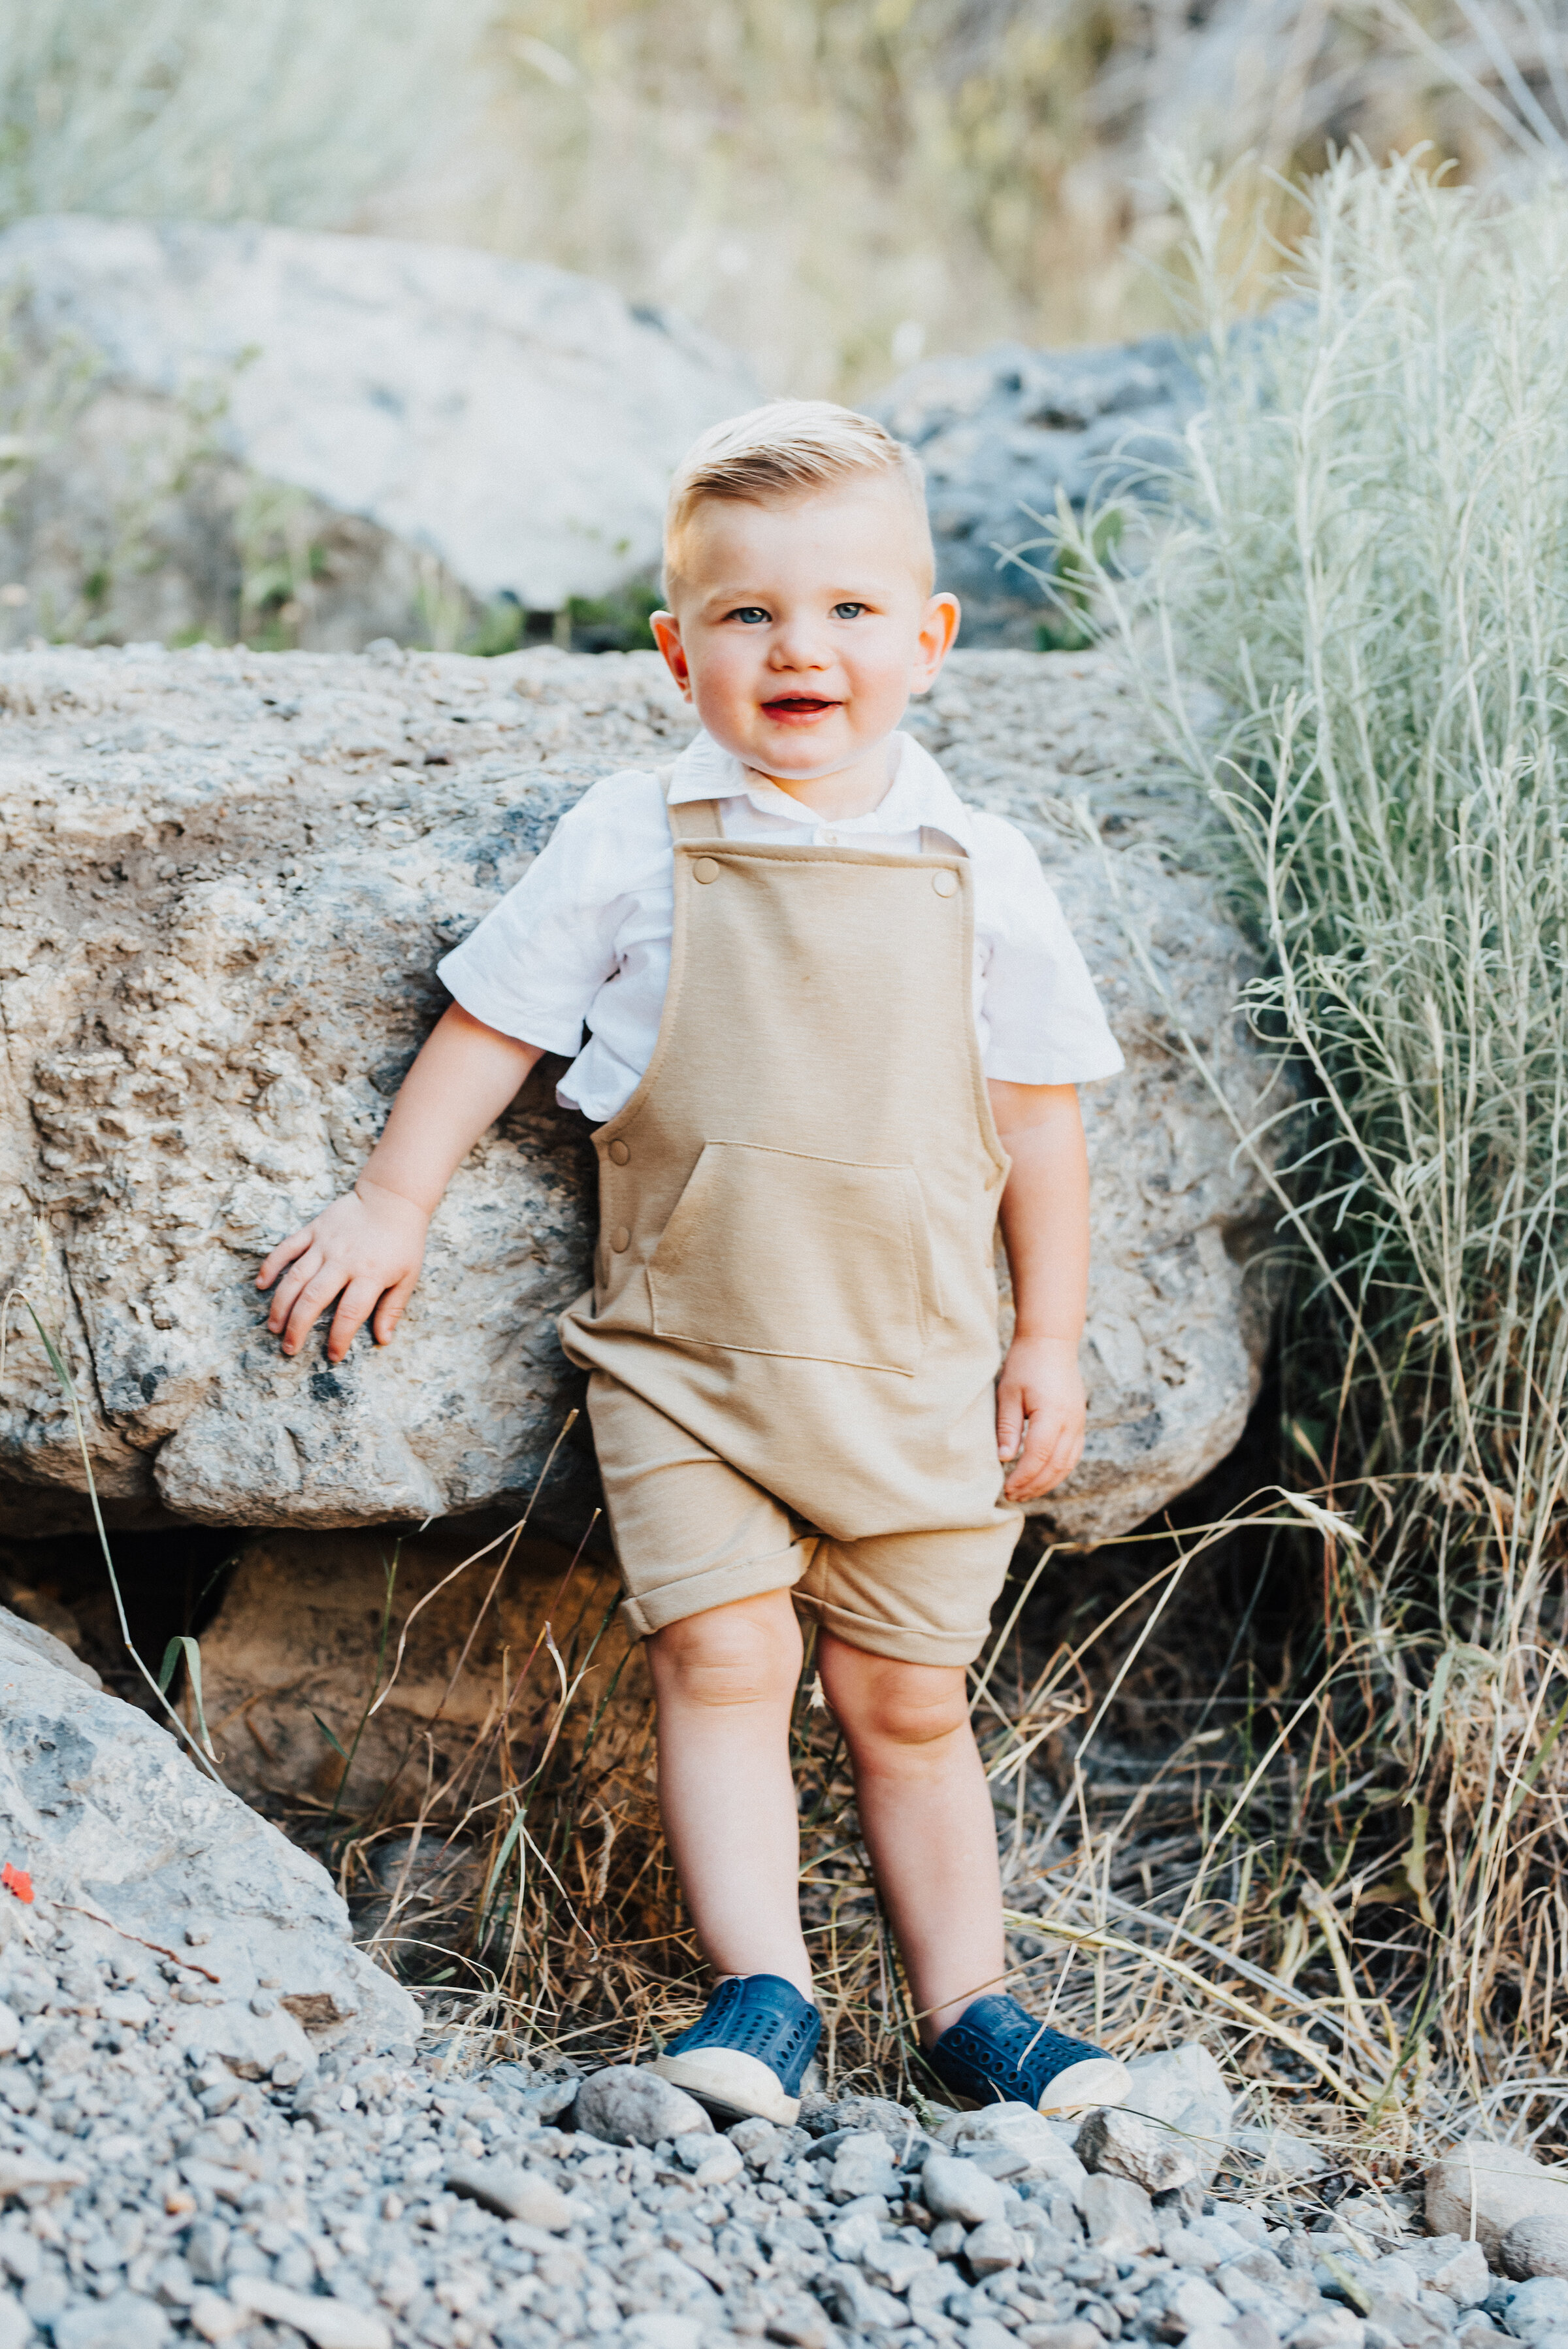  An adorable toddler in precious tan overalls with perfectly combed hair rests up against a large boulder in Providence Canyon, UT. toddler wearing overalls light blue and khakis soft outdoor setting standing on rocky path #familylove #photoshoot #familyportraits #familygoals #photostudio #kids #photo #portrait #familyfun #familyday #familylife #outdoorphotoshoot #son 